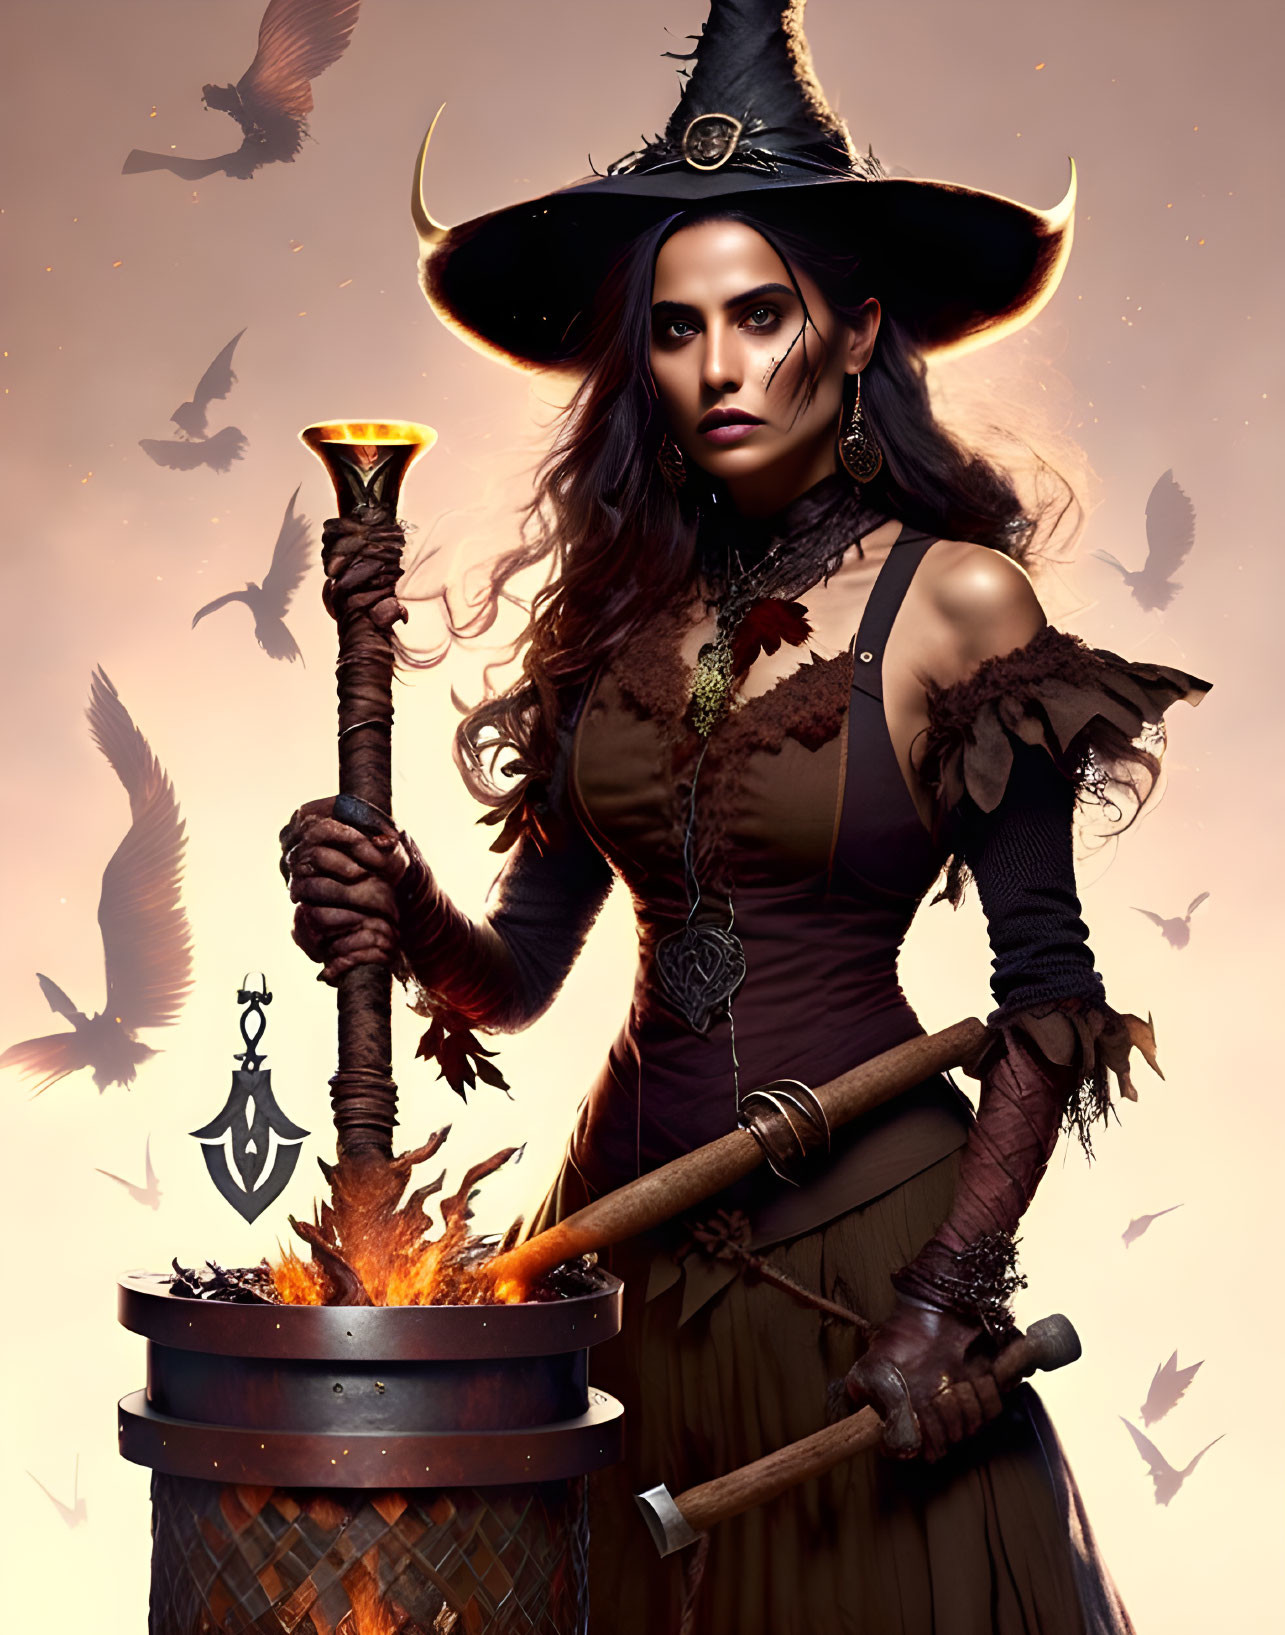 Serious witch with staff and cauldron under bird-filled sky